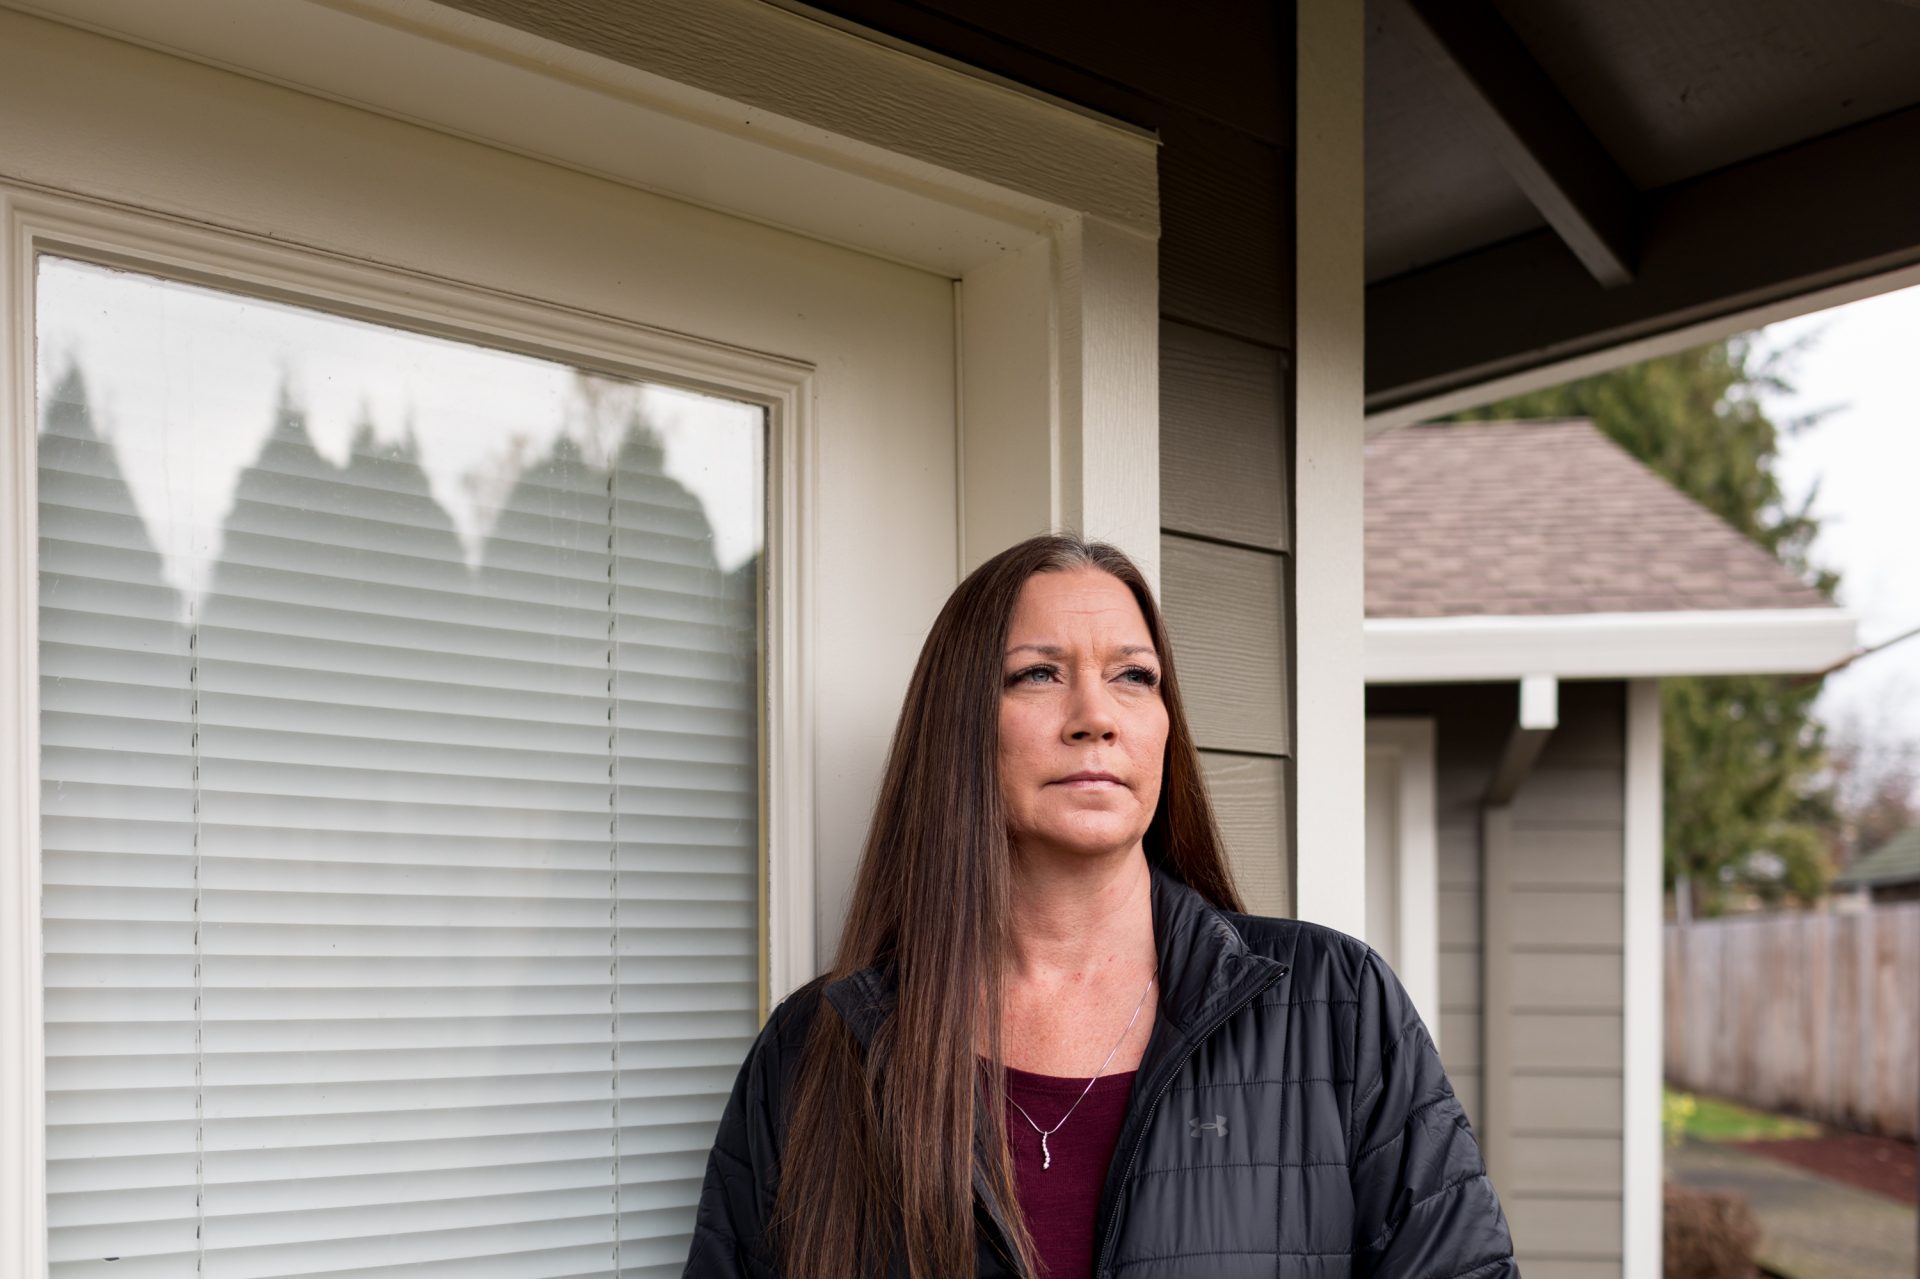 Kimberly Conger, RN, and Sarah McSweeney's provider of services, outside McSweeney's group home in Oregon City, Oregon on Tuesday, November 24, 2020. "She loved to get her hair done and she just finished Discovery for employment," said Conger.